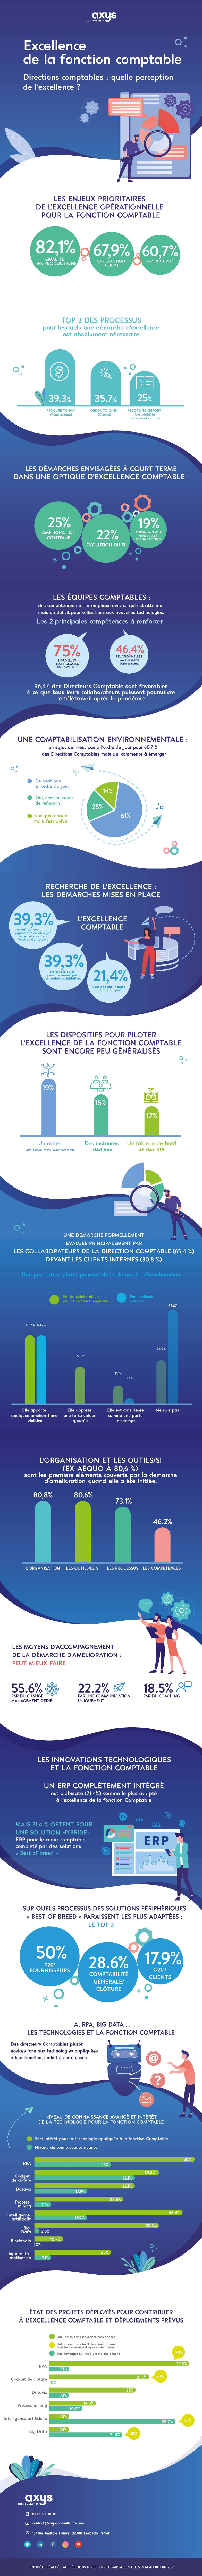 infographie excellence comptable